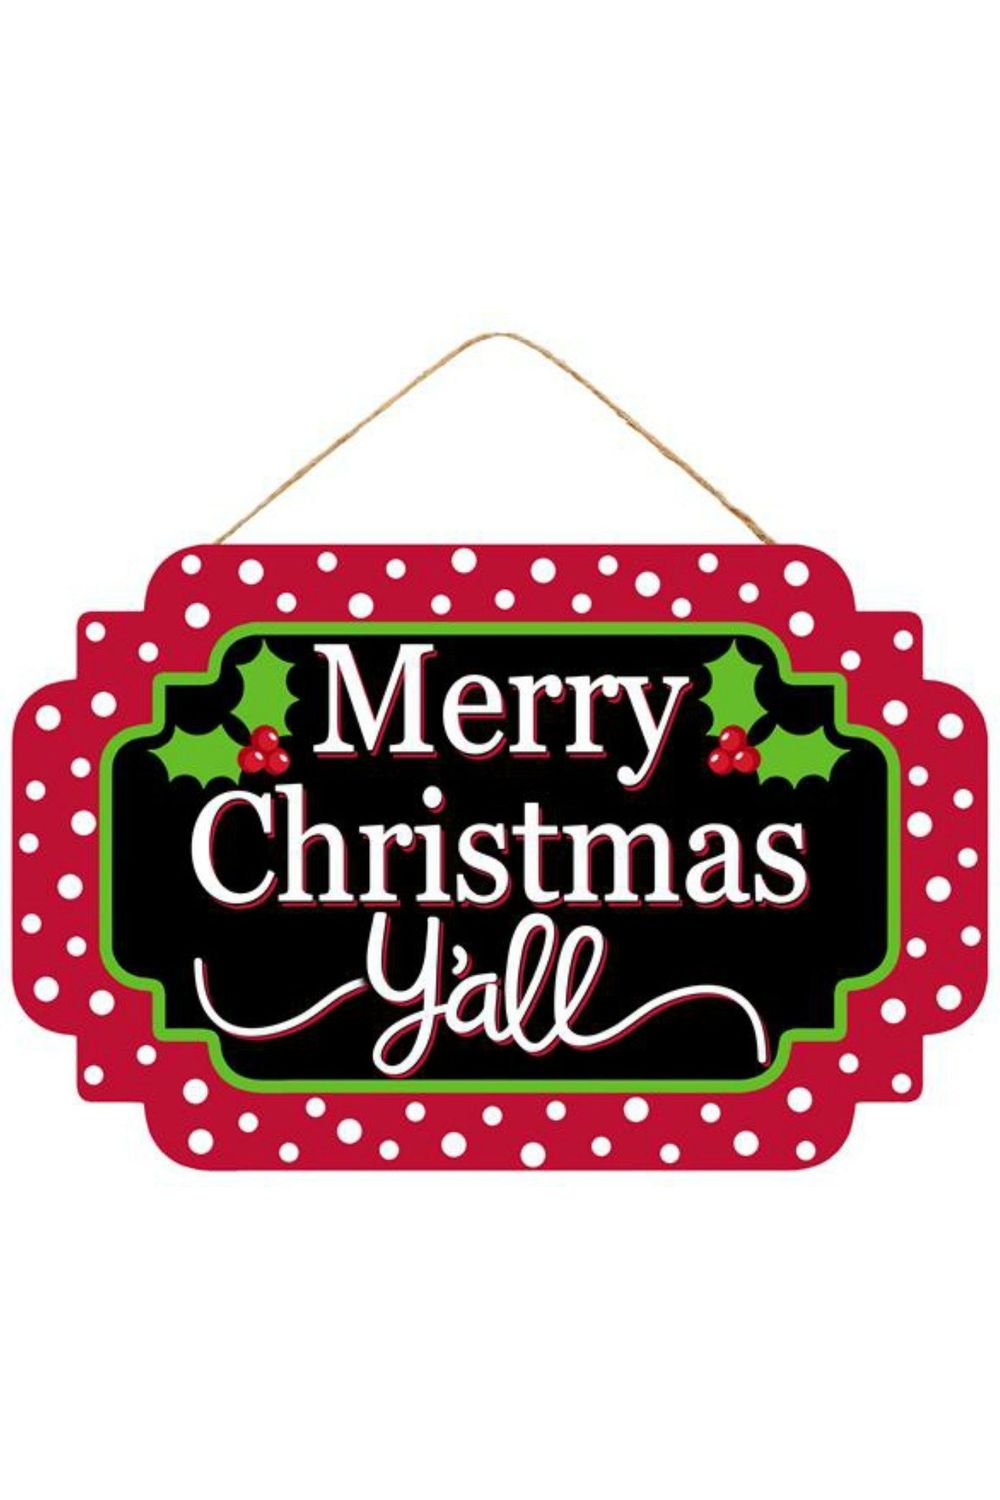 Shop For 12" Wooden Sign: Merry Christmas Yall AP8302